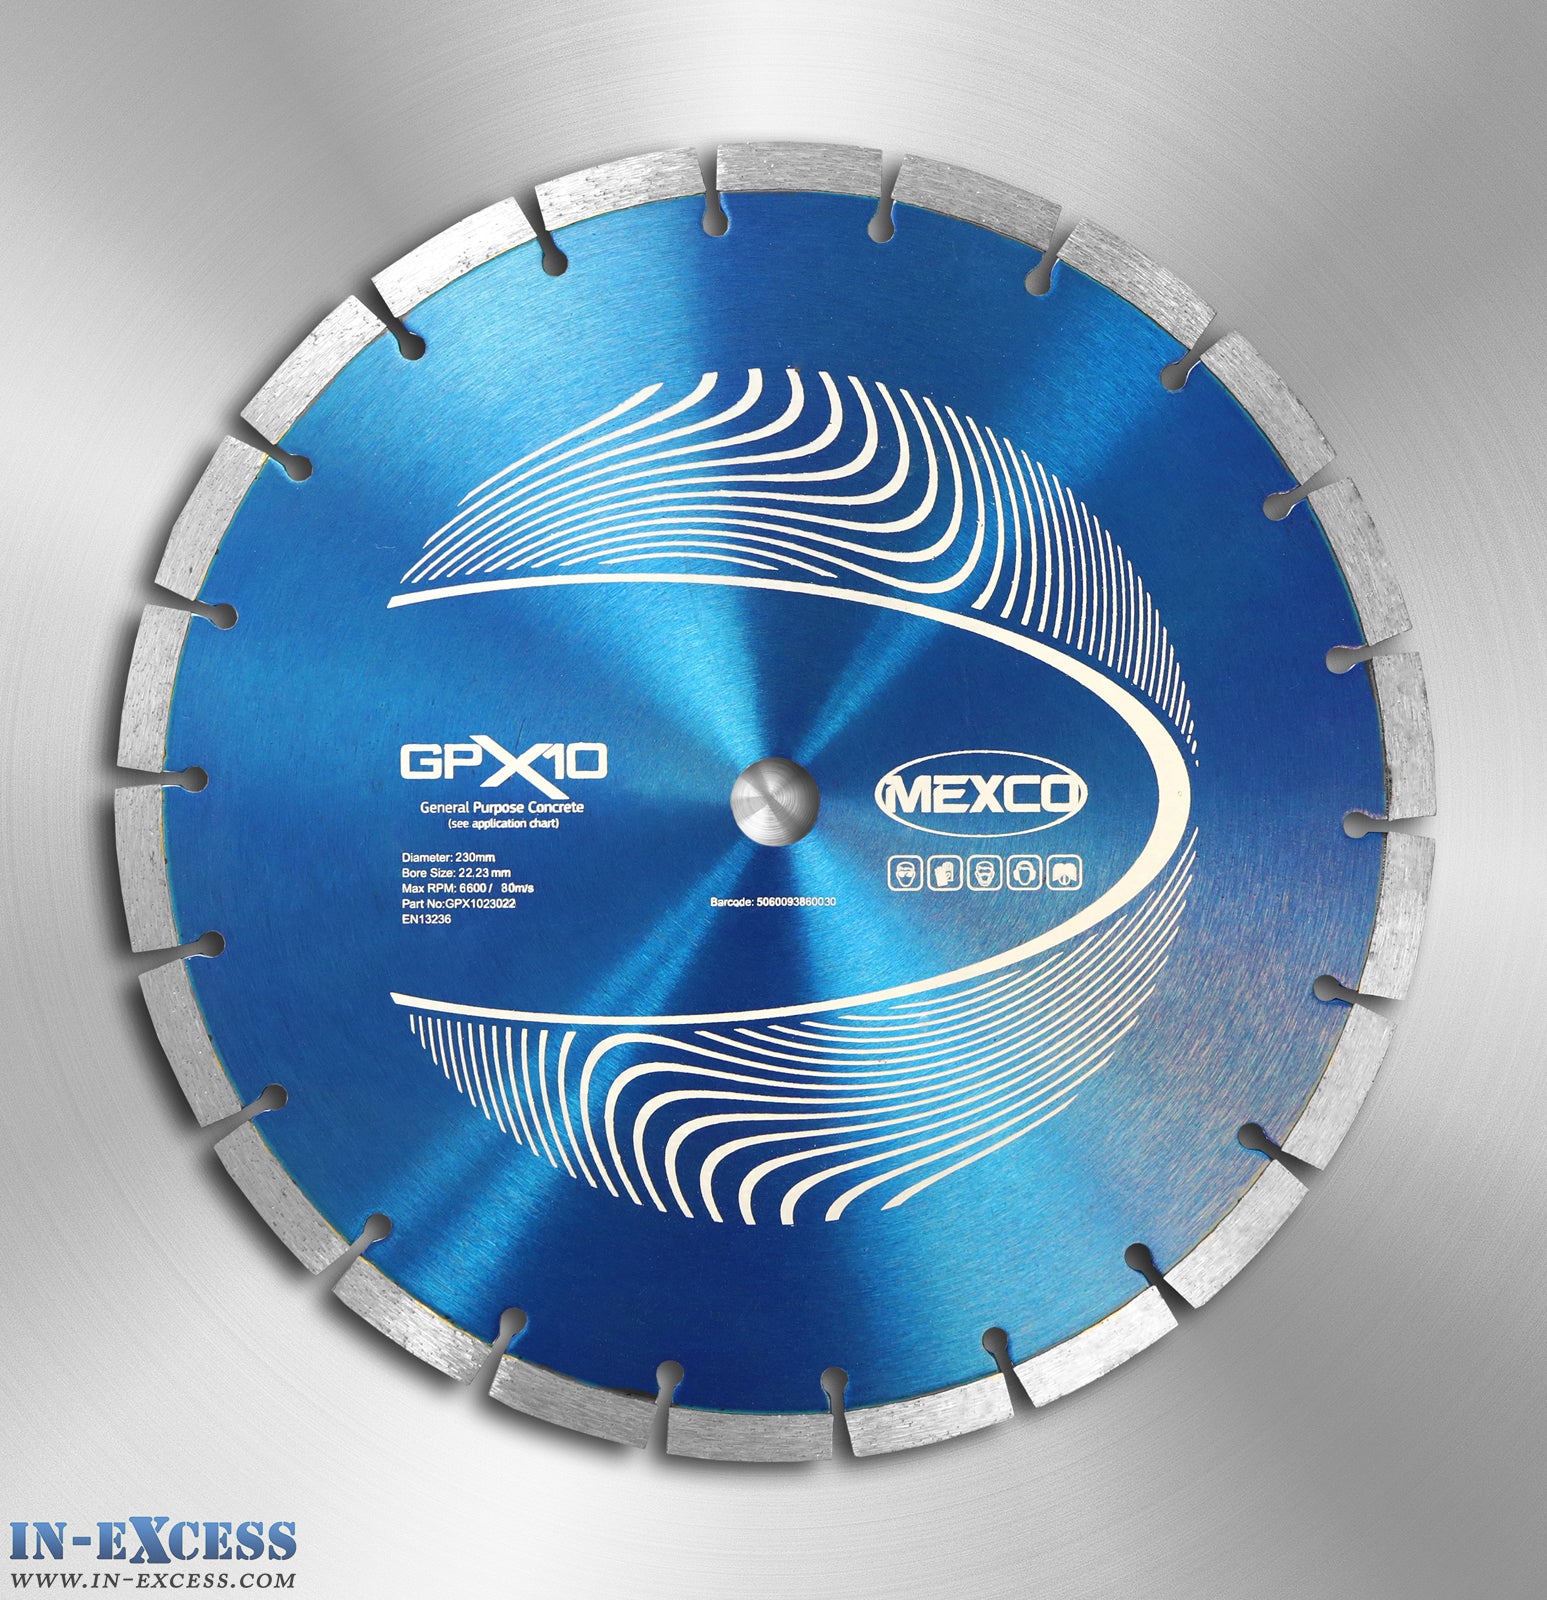 Mexco Professional GPX10 Diamond Cutting Disc for Concrete 230mm